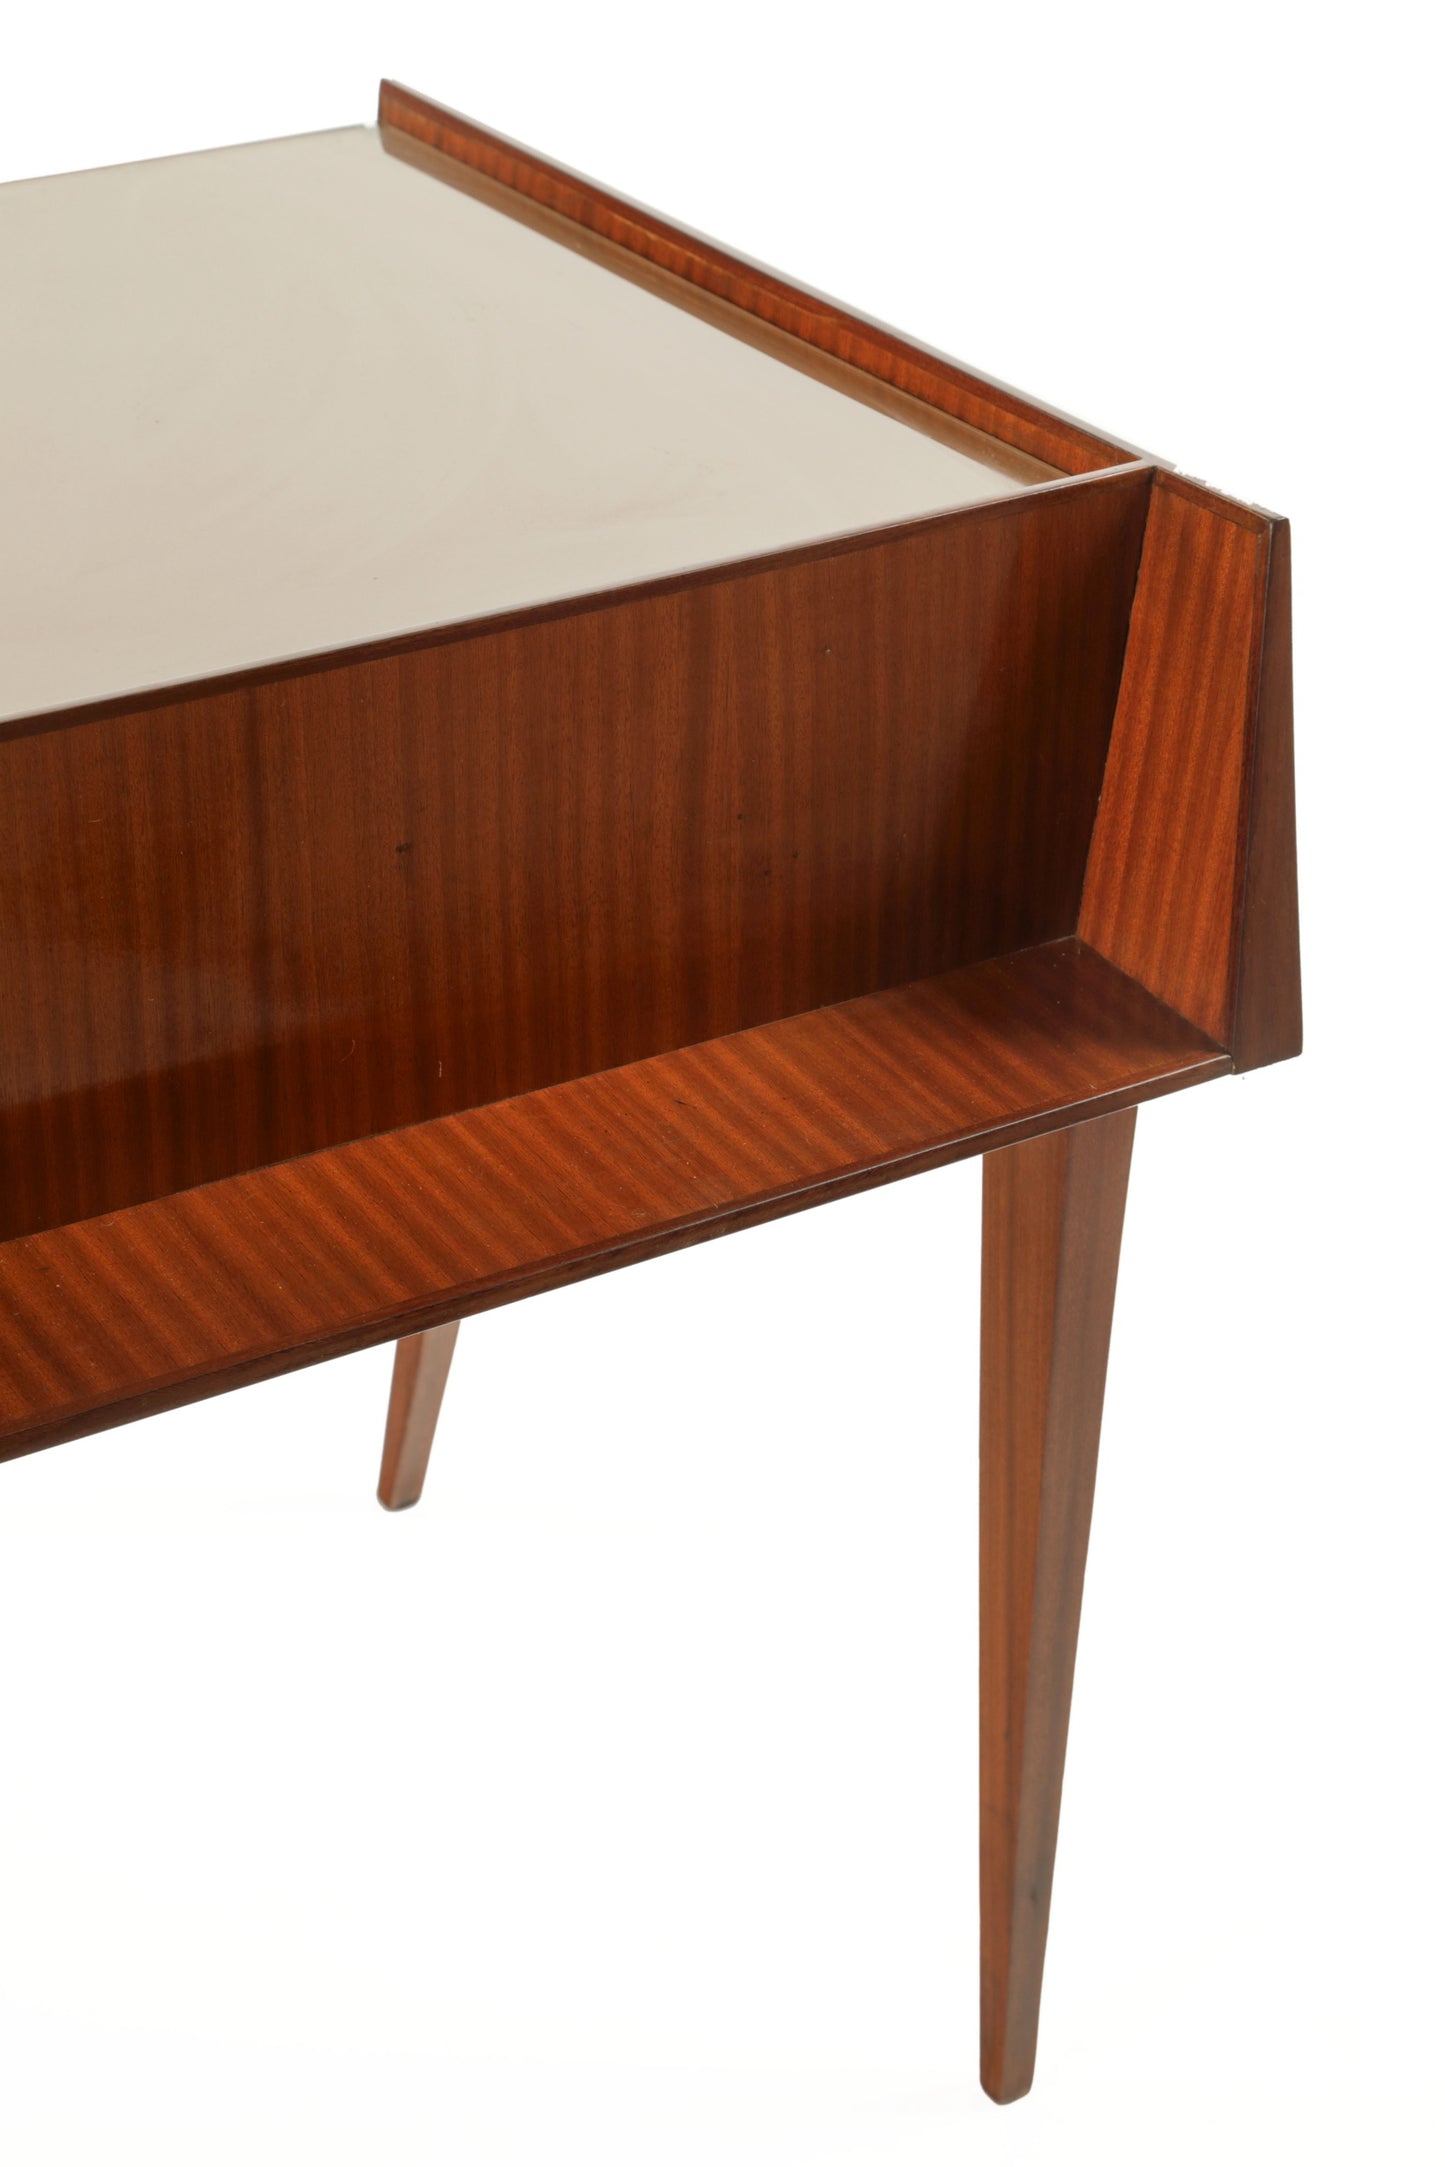 Ico Parisi desk from the 60s with chair